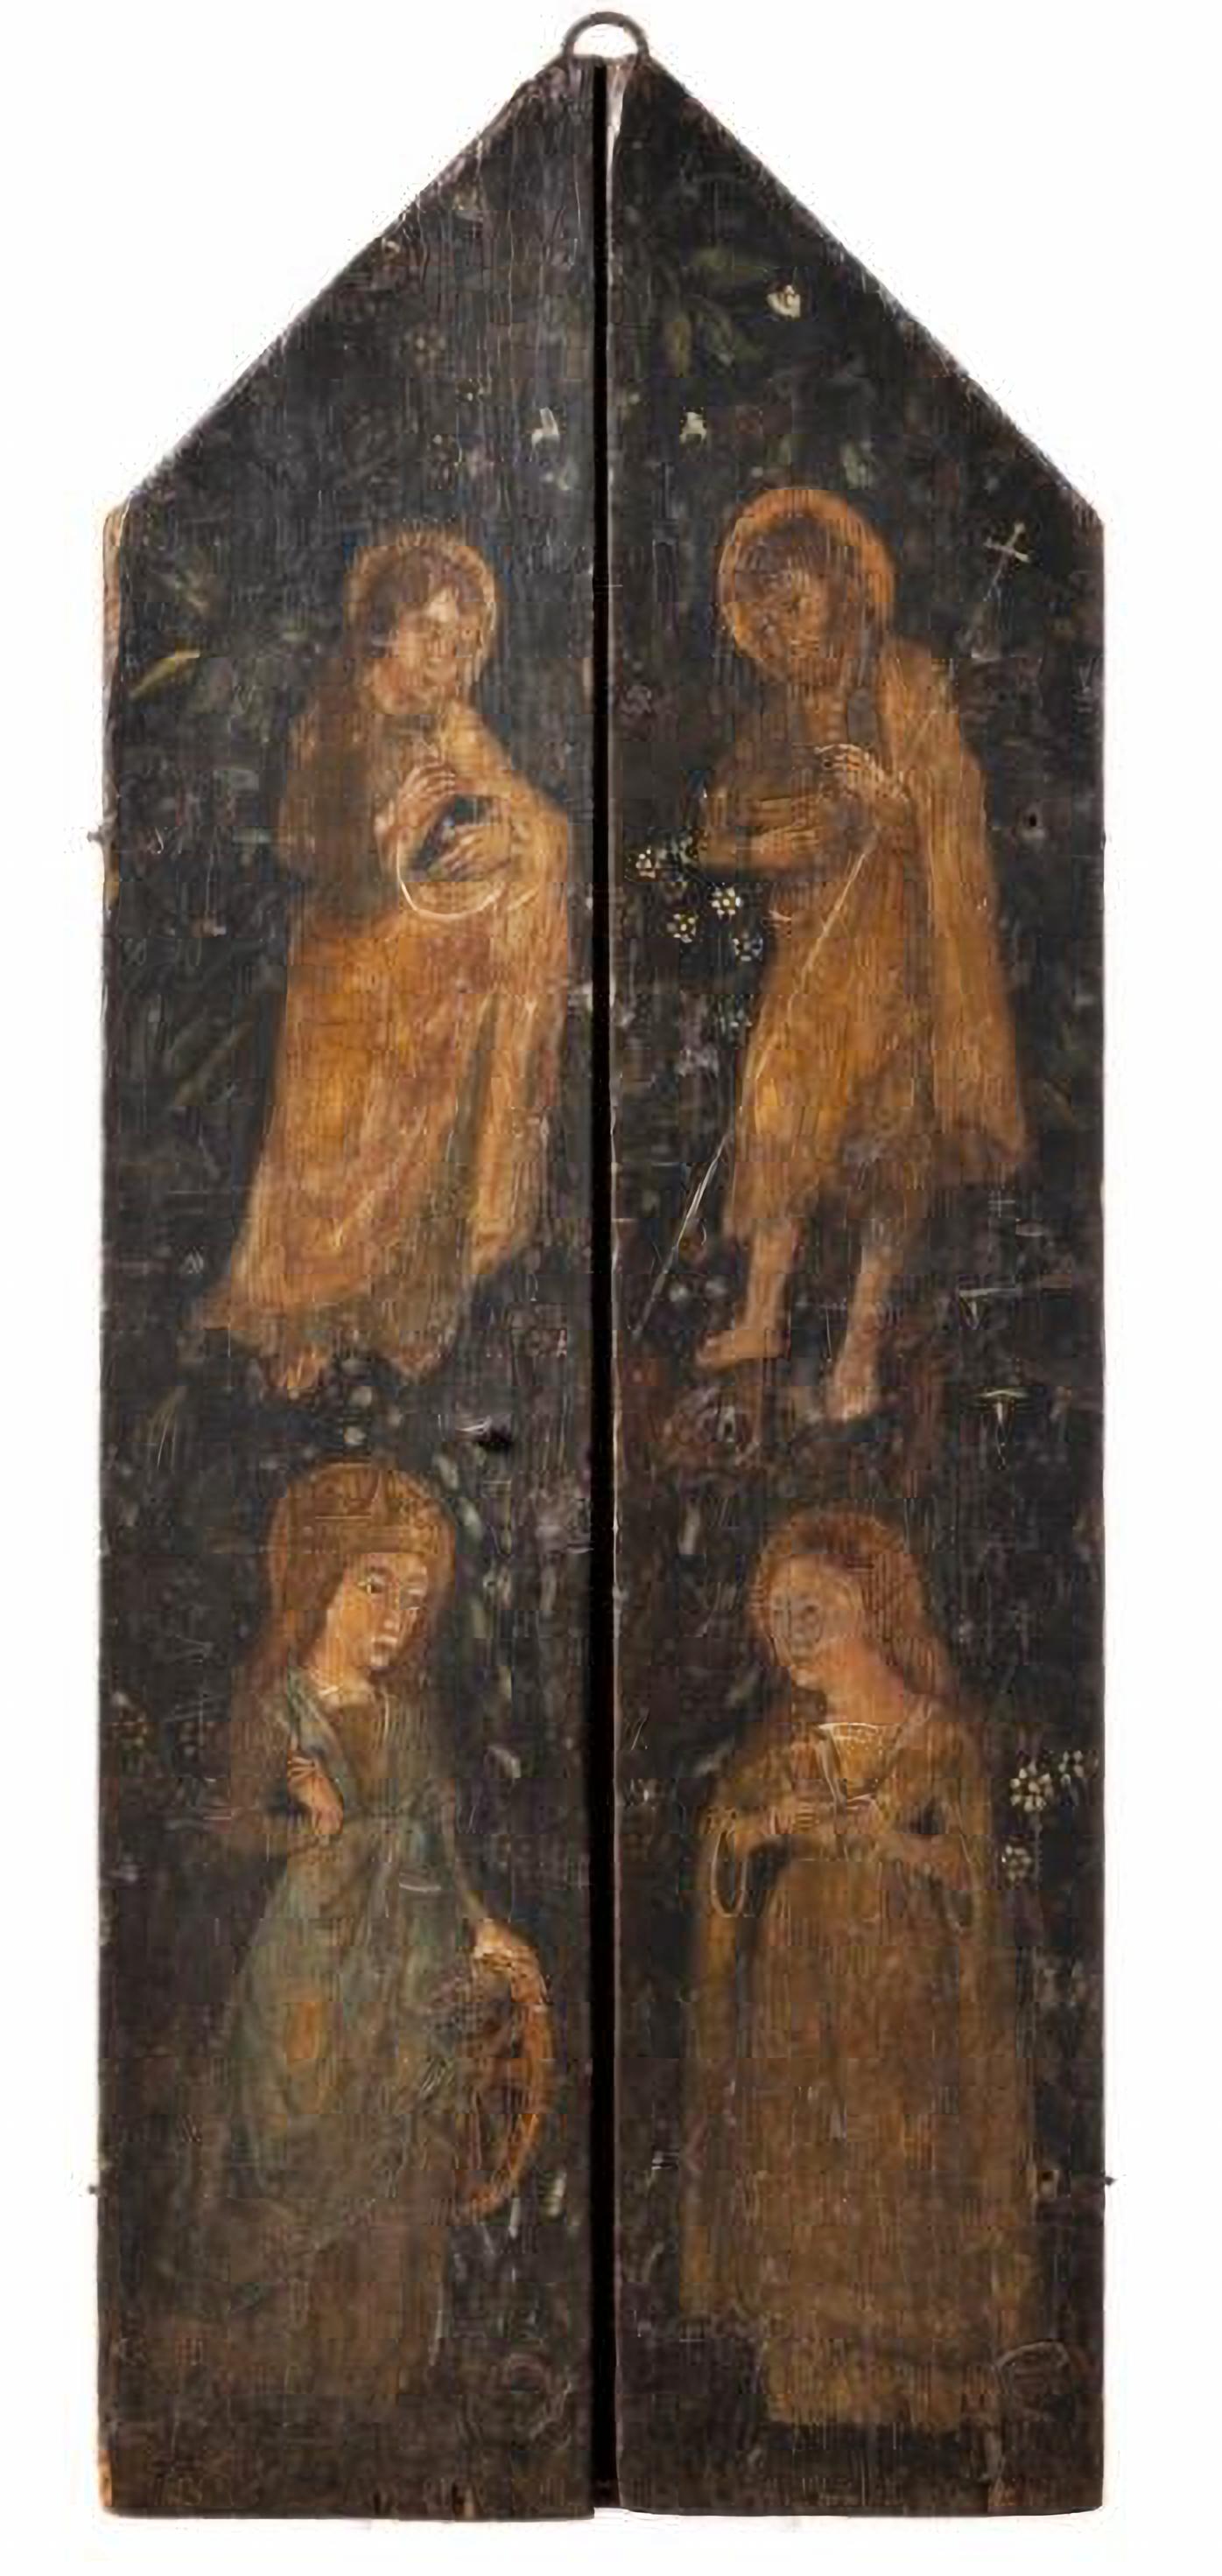 IMPORTANT TRIPTIC
FLORENTINE SCHOOL (Italy) 16th Century

Oil on wood, representing the Eternal Father, Our Lady with Baby Jesus, Saint Bernadino of Siena, San León, Saint Stephen and Saint Dominic .
Period defects
Dim.: (open) 120 x 94 cm.;
Dim.: